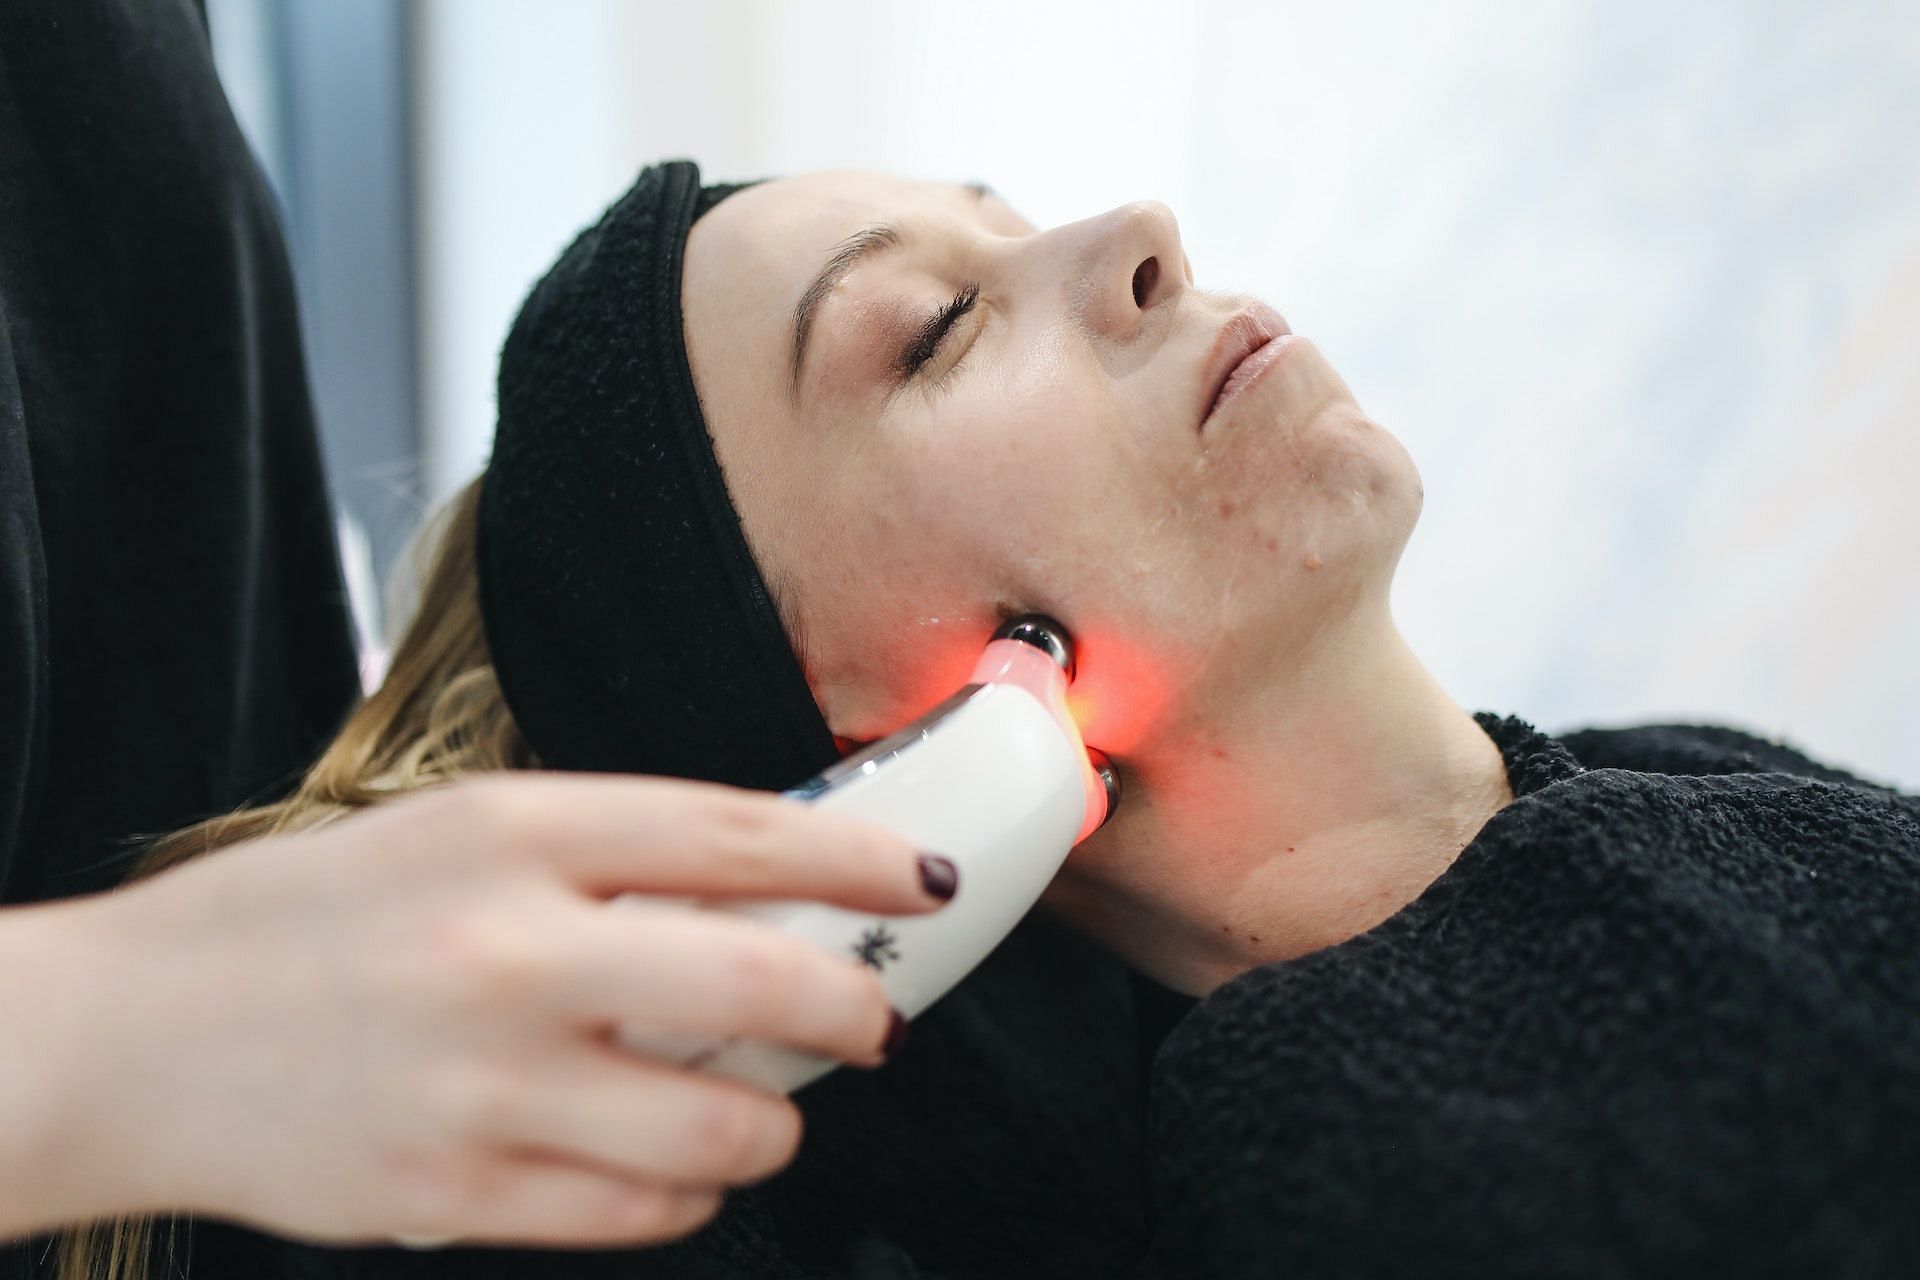 Laser treatment can help with red moles on skin. (Photo via Pexels/Polina Tankilevitch)